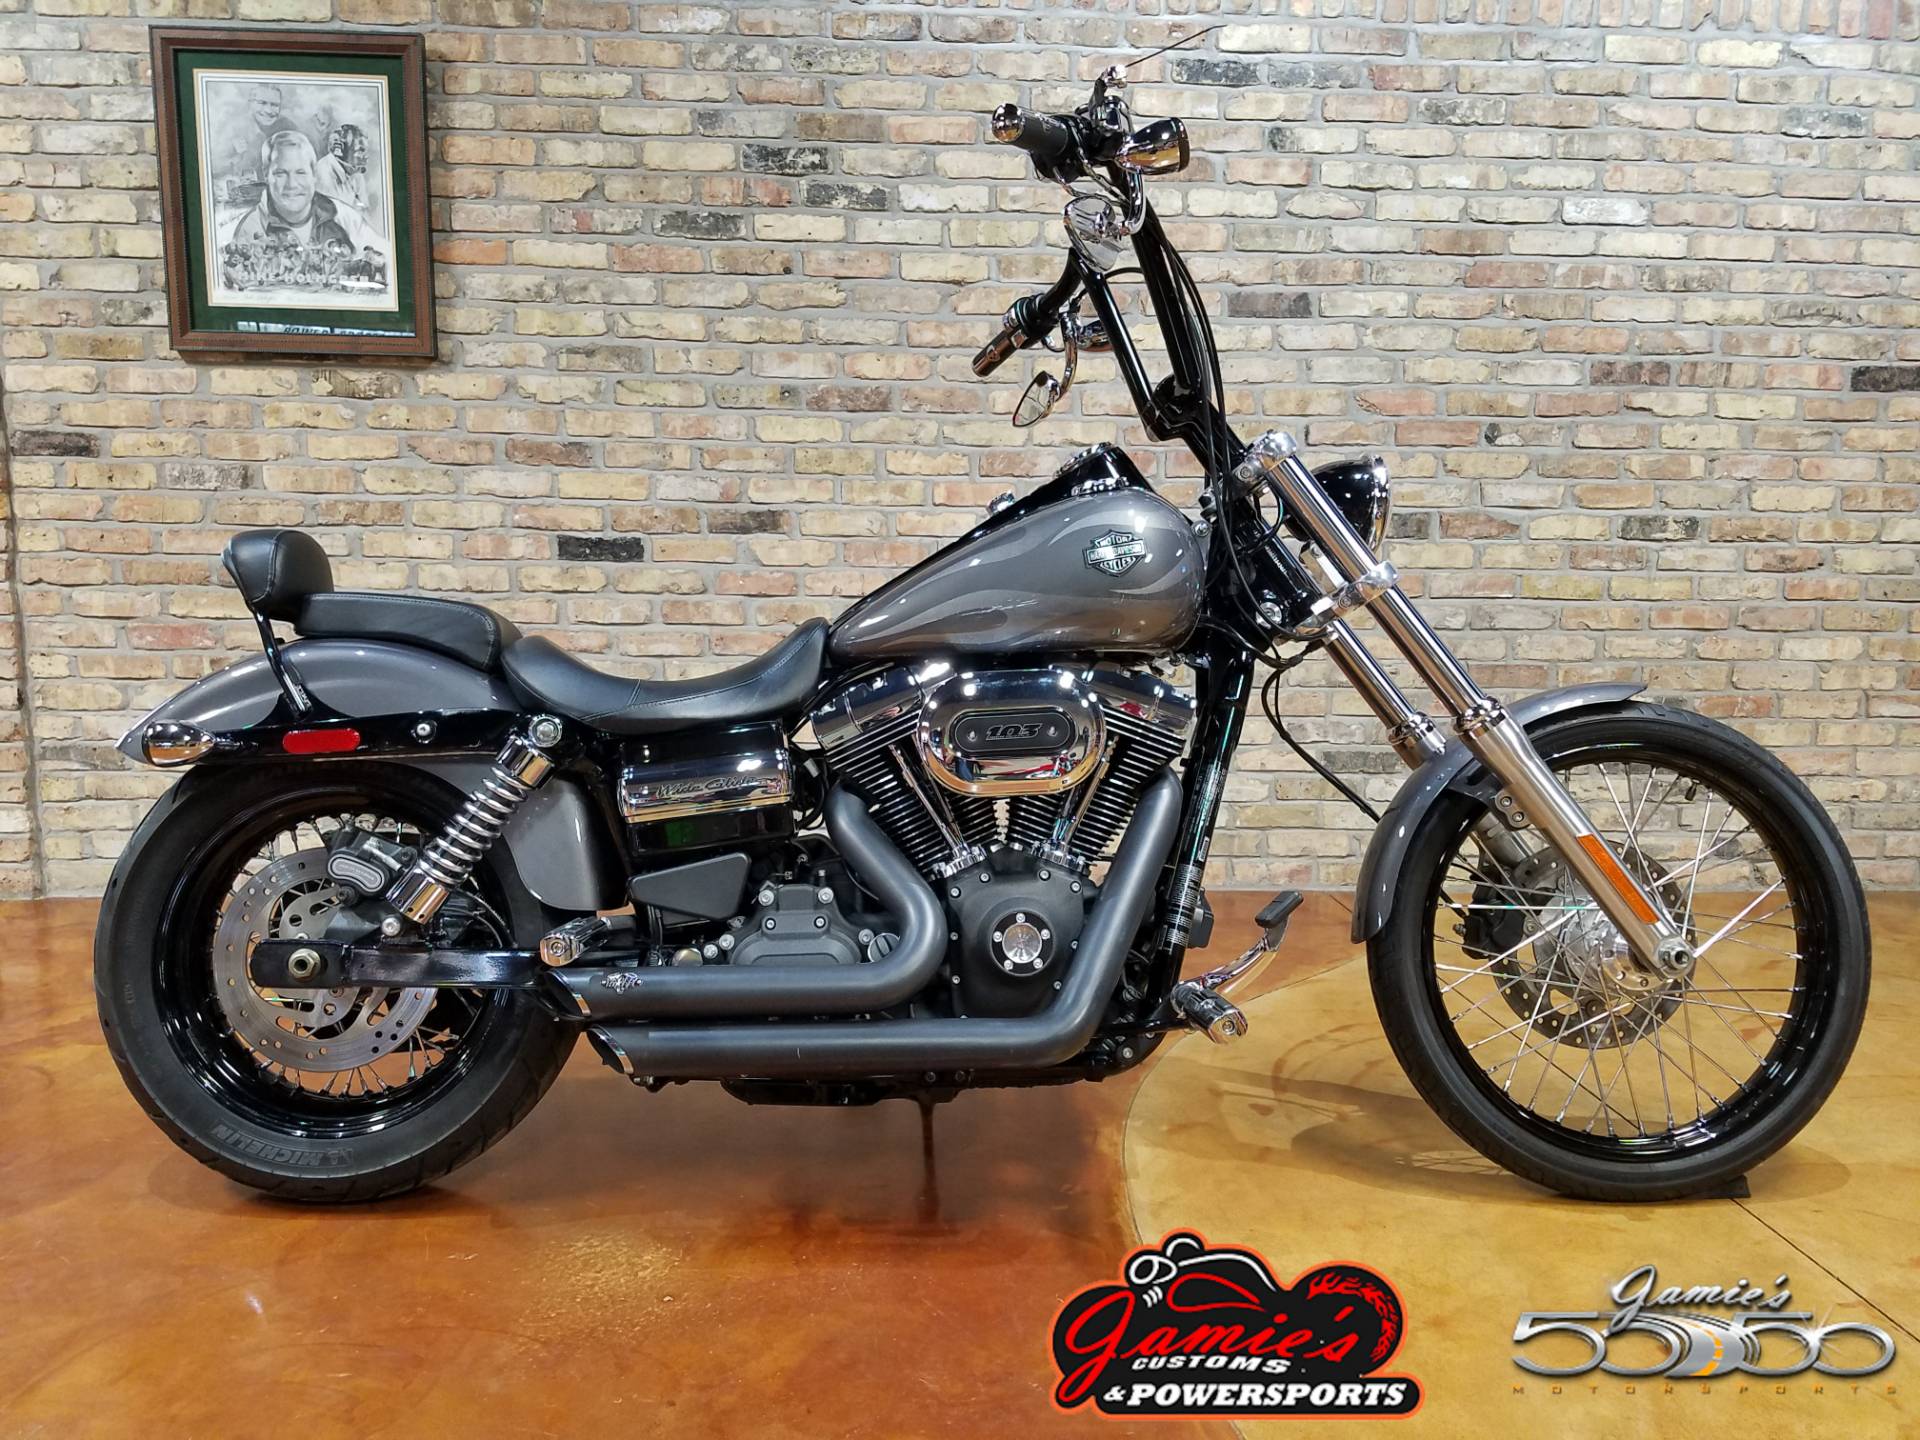 Used 2016 Harley Davidson Wide Glide Motorcycles In Big Bend Wi 4381 Charcoal Pearl With Flames